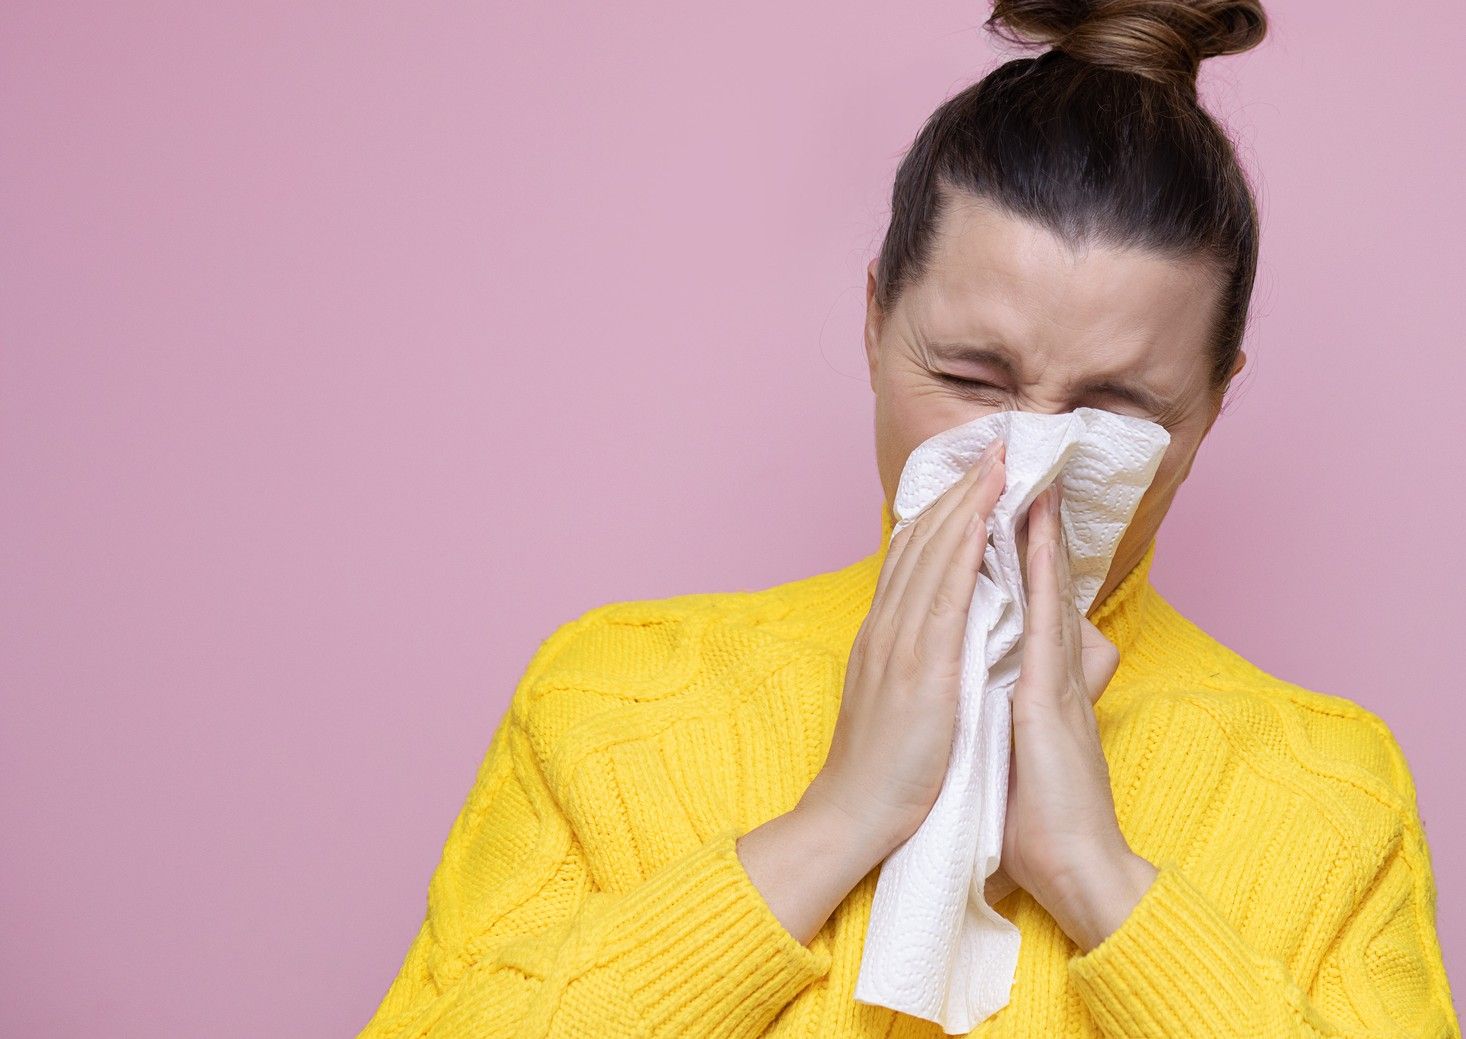 A woman's constantly runny nose was misdiagnosed as allergies.